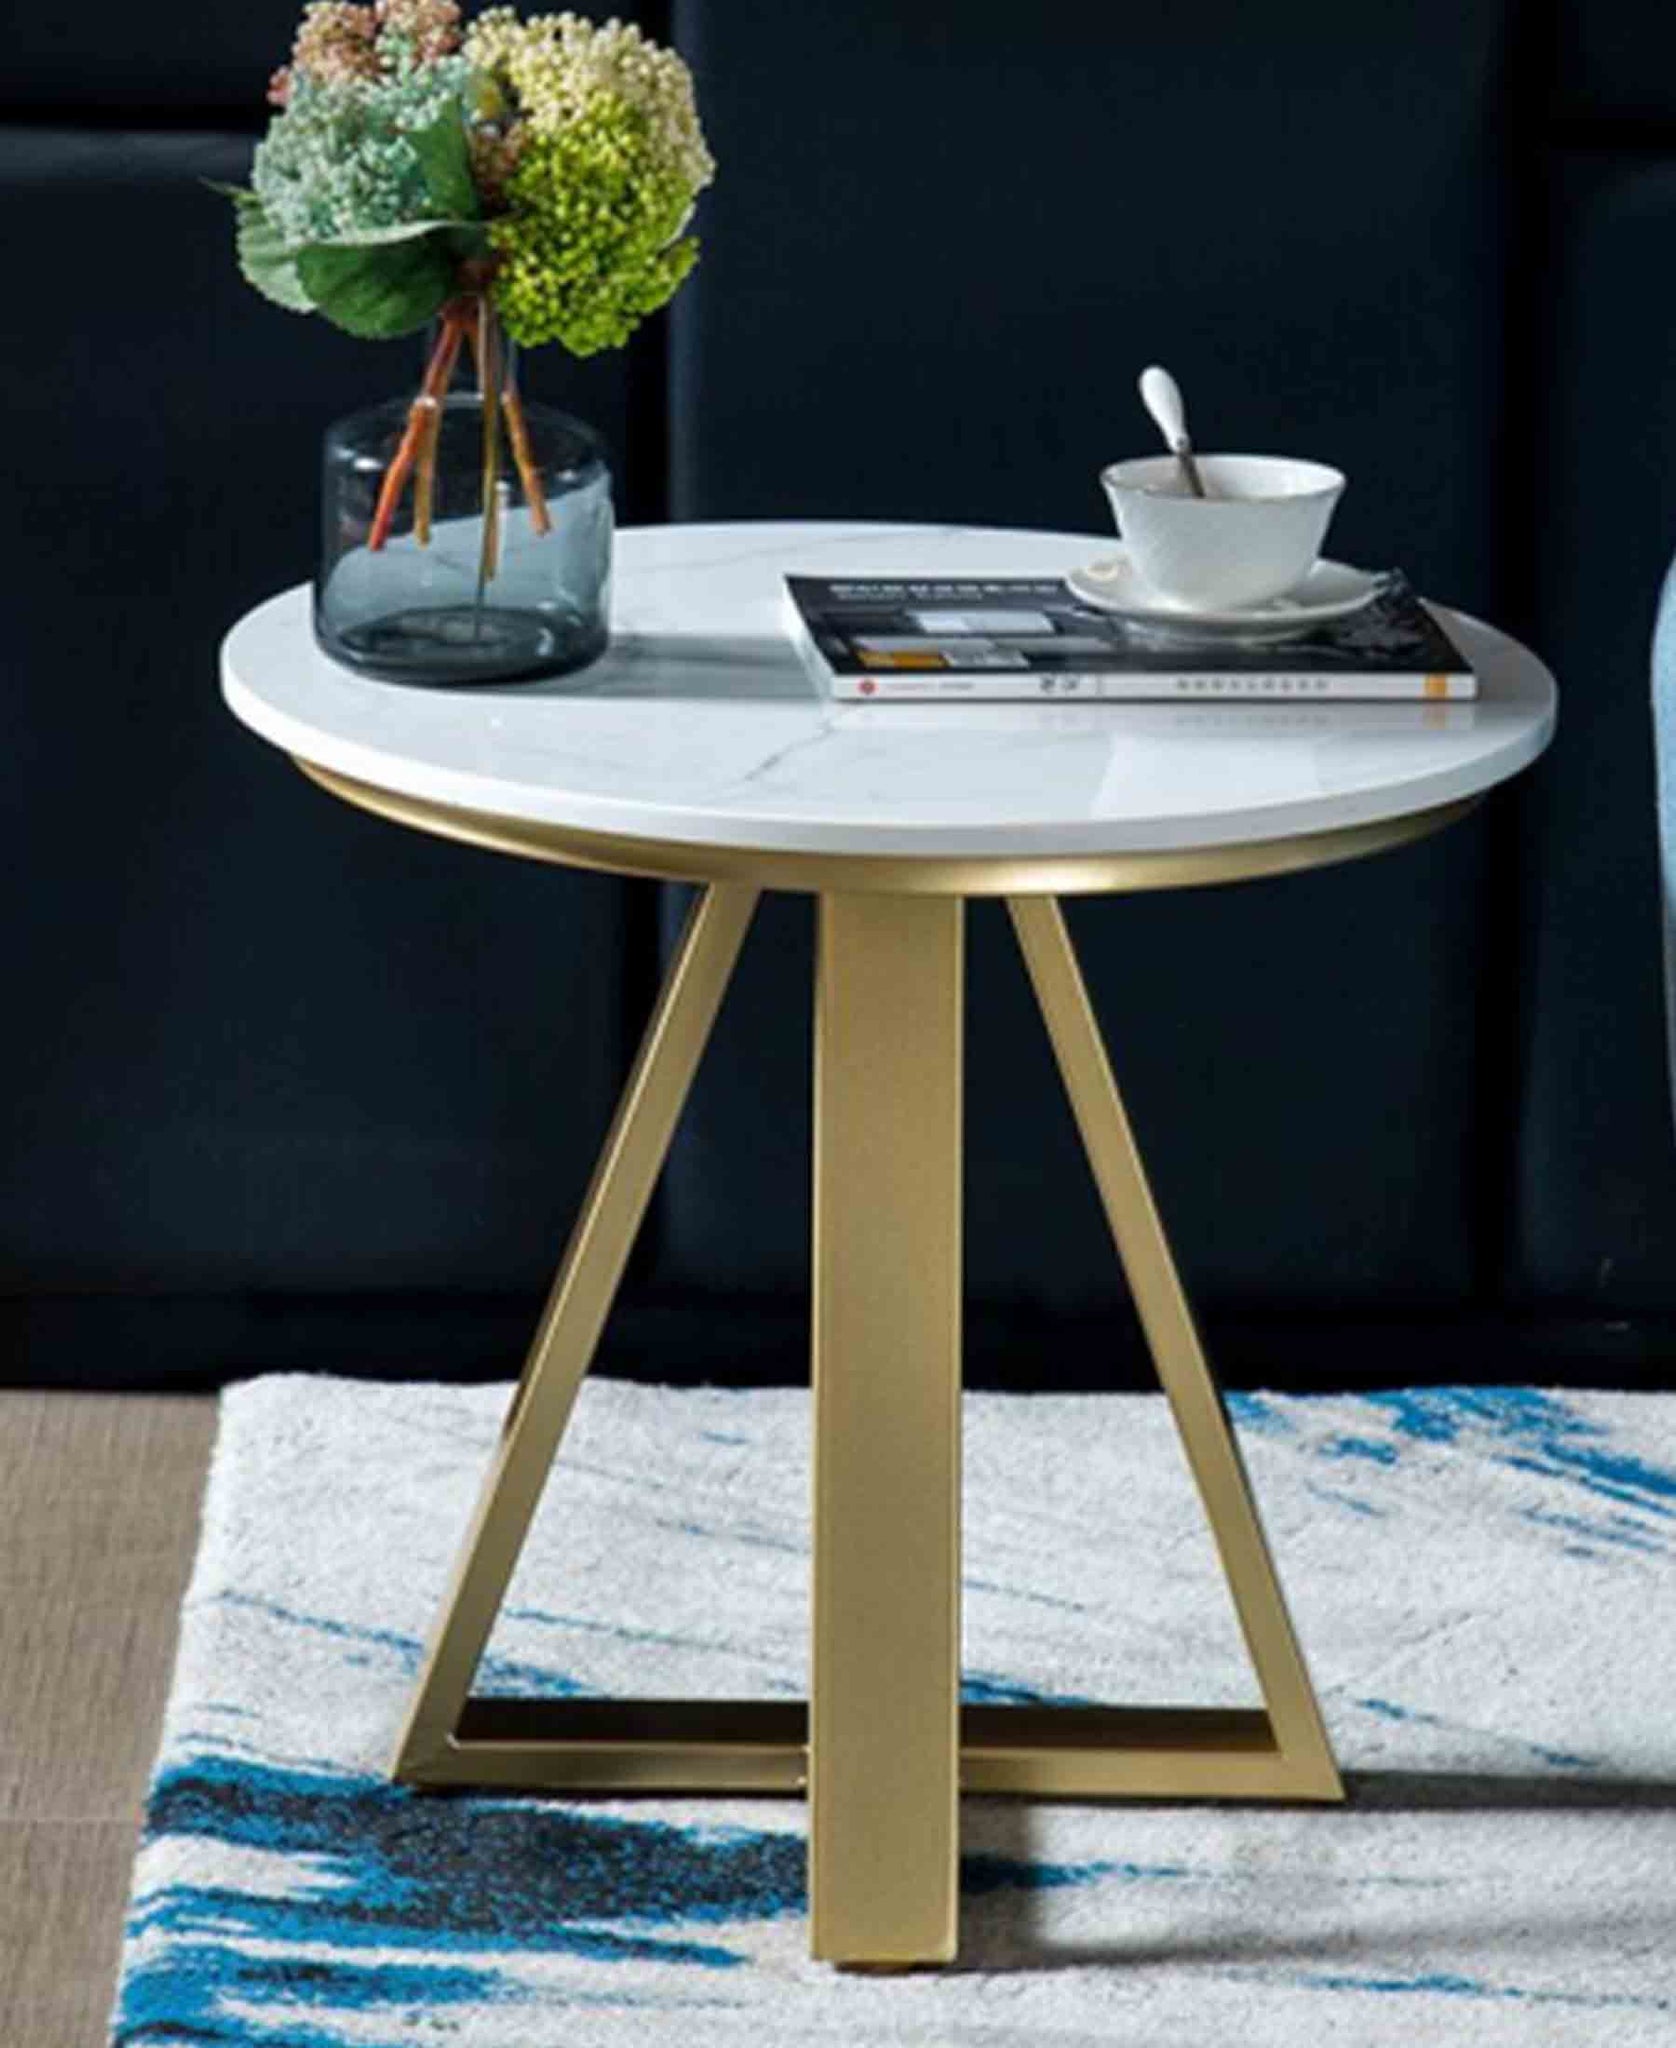 Exotic Designs Freya Side Table - White & Gold